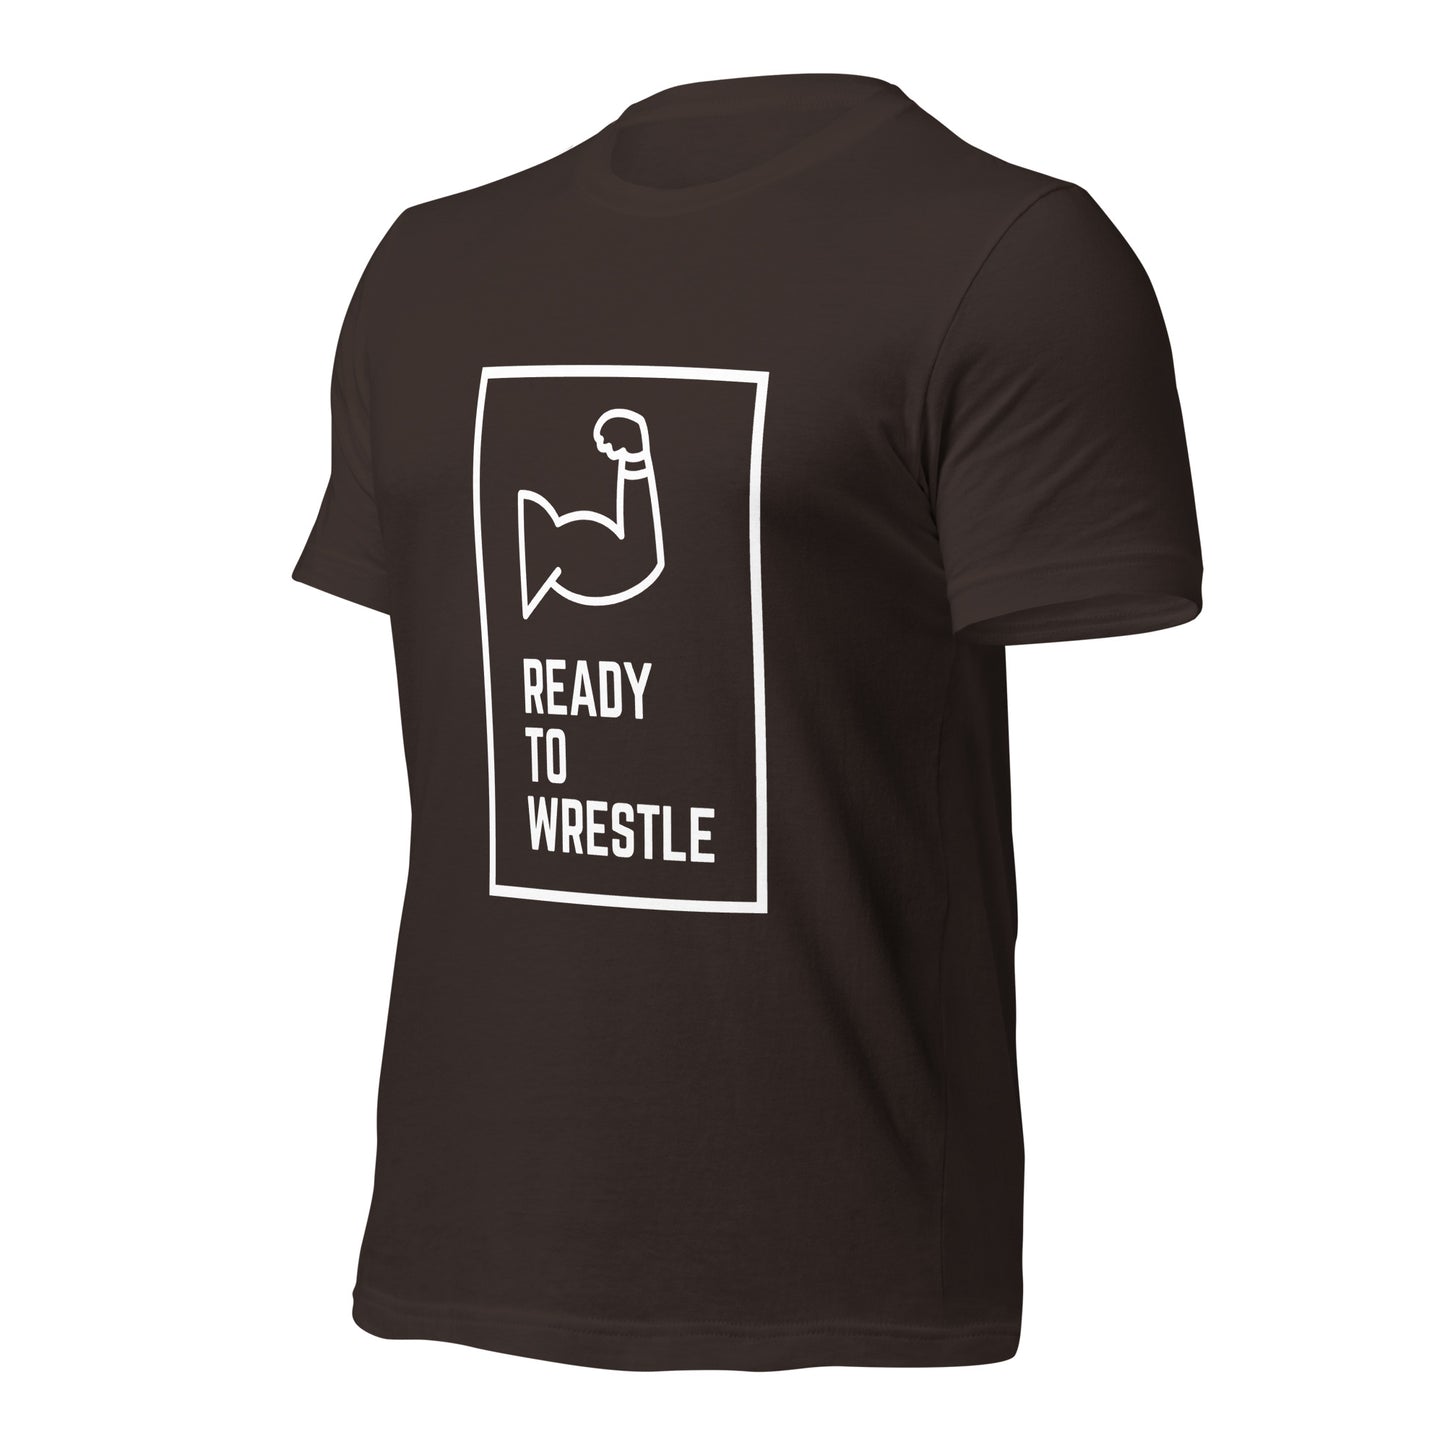 Ready to Wrestle Printed t-shirt